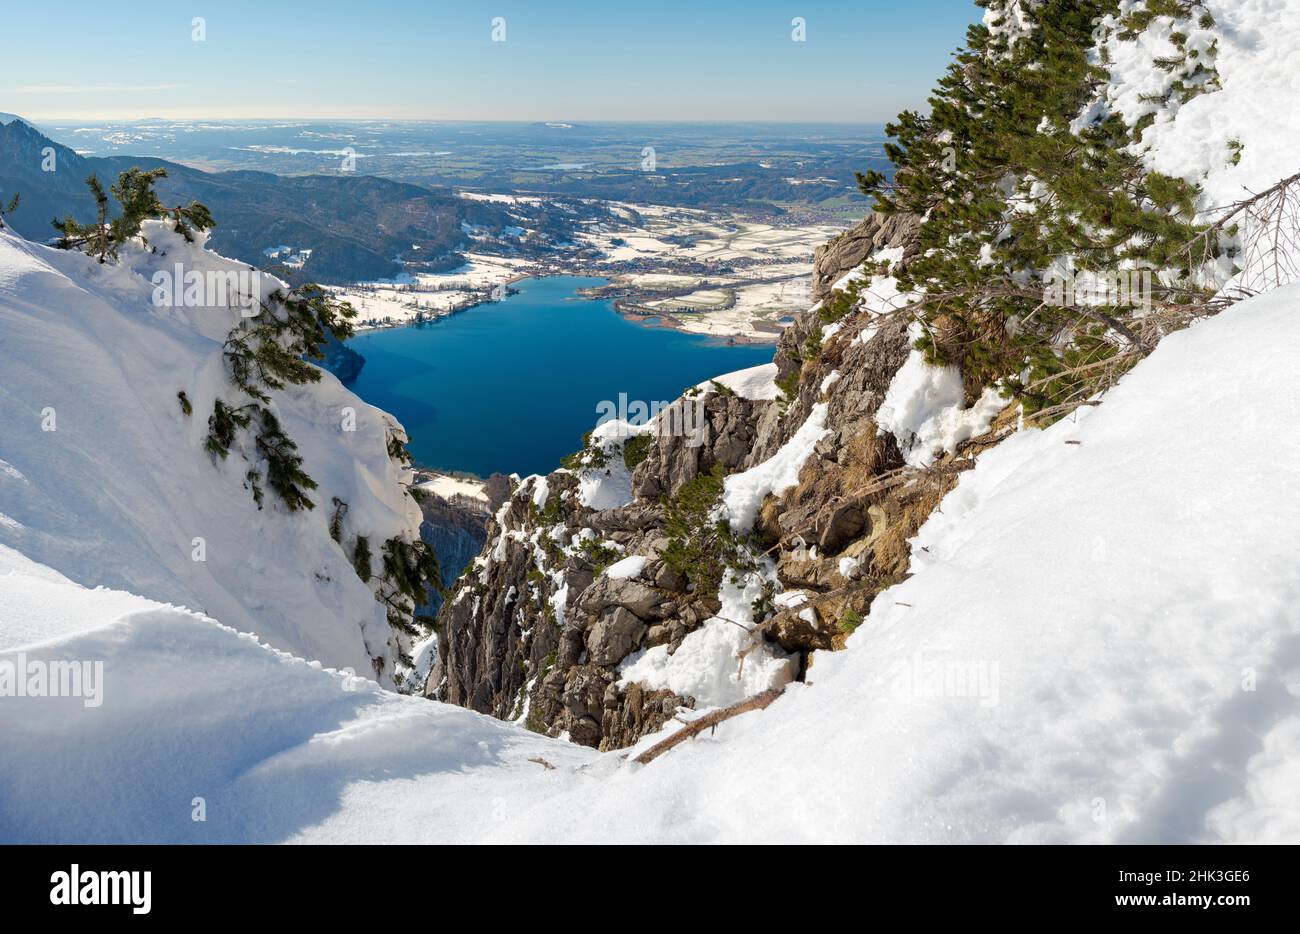 View towards lake Kochelsee and the foothills of the Alps near Munich. View from Mt. Jochberg near lake Walchensee during winter in the Bavarian Alps. Stock Photo